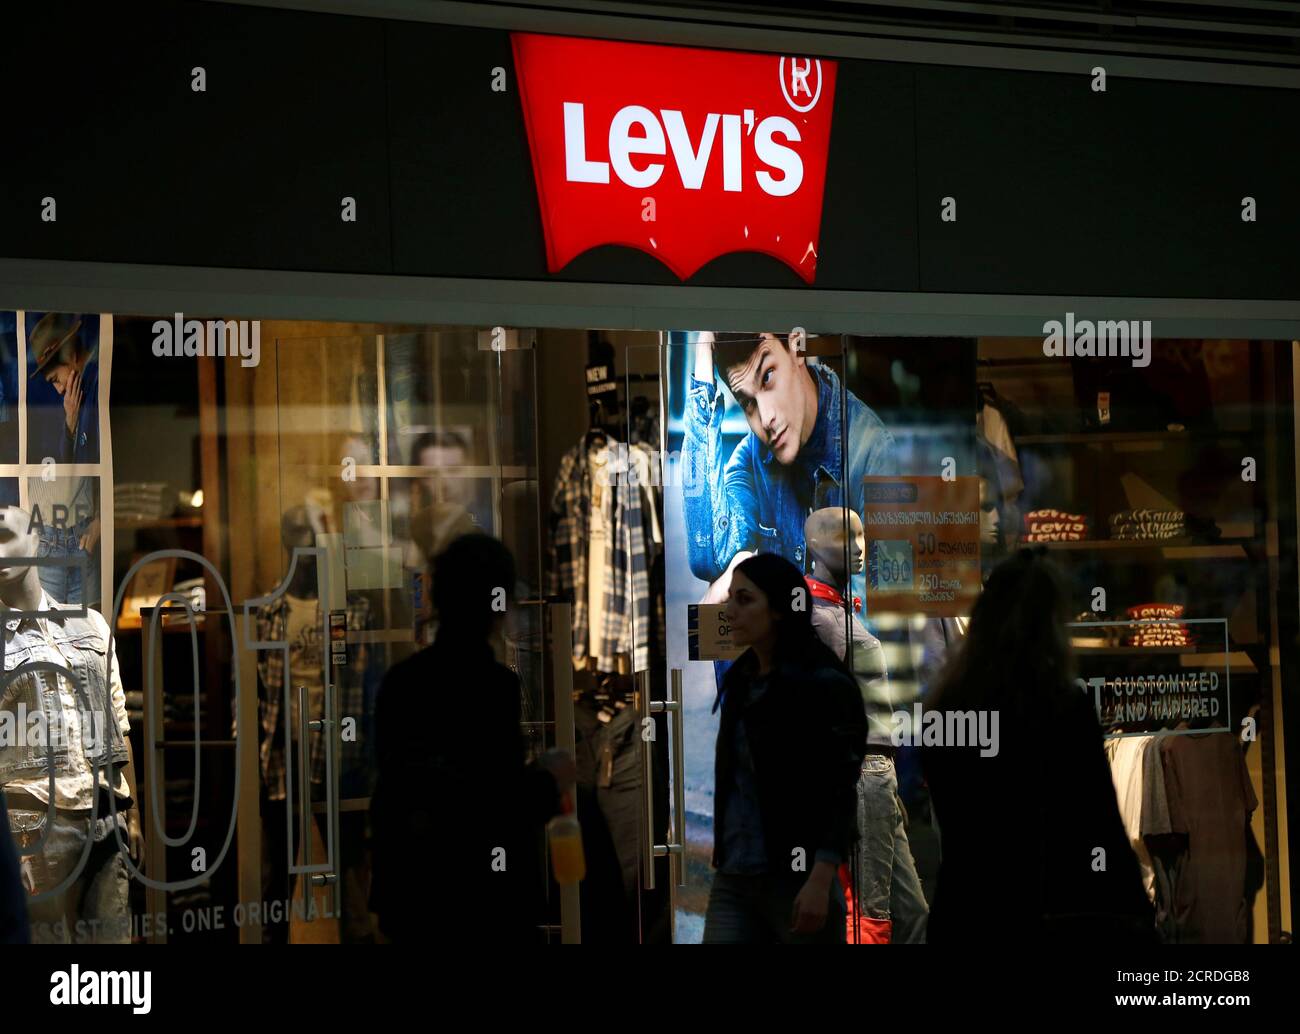 Page 6 - Levis Store High Resolution Stock Photography and Images - Alamy